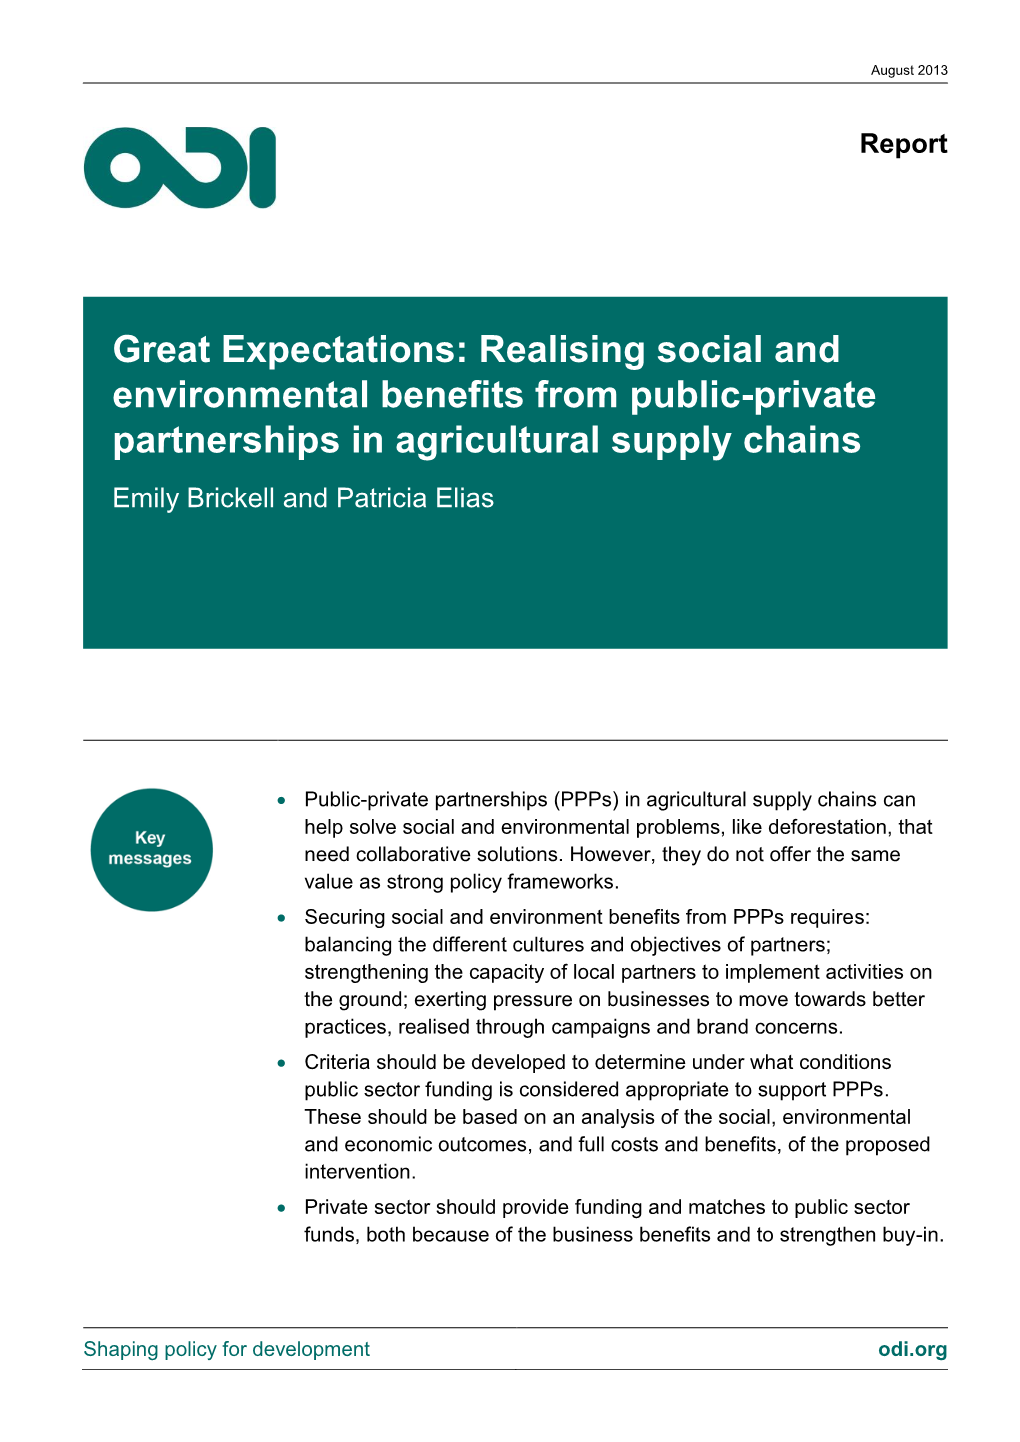 Great Expectations: Realising Social and Environmental Benefits from Public-Private Partnerships in Agricultural Supply Chains Emily Brickell and Patricia Elias